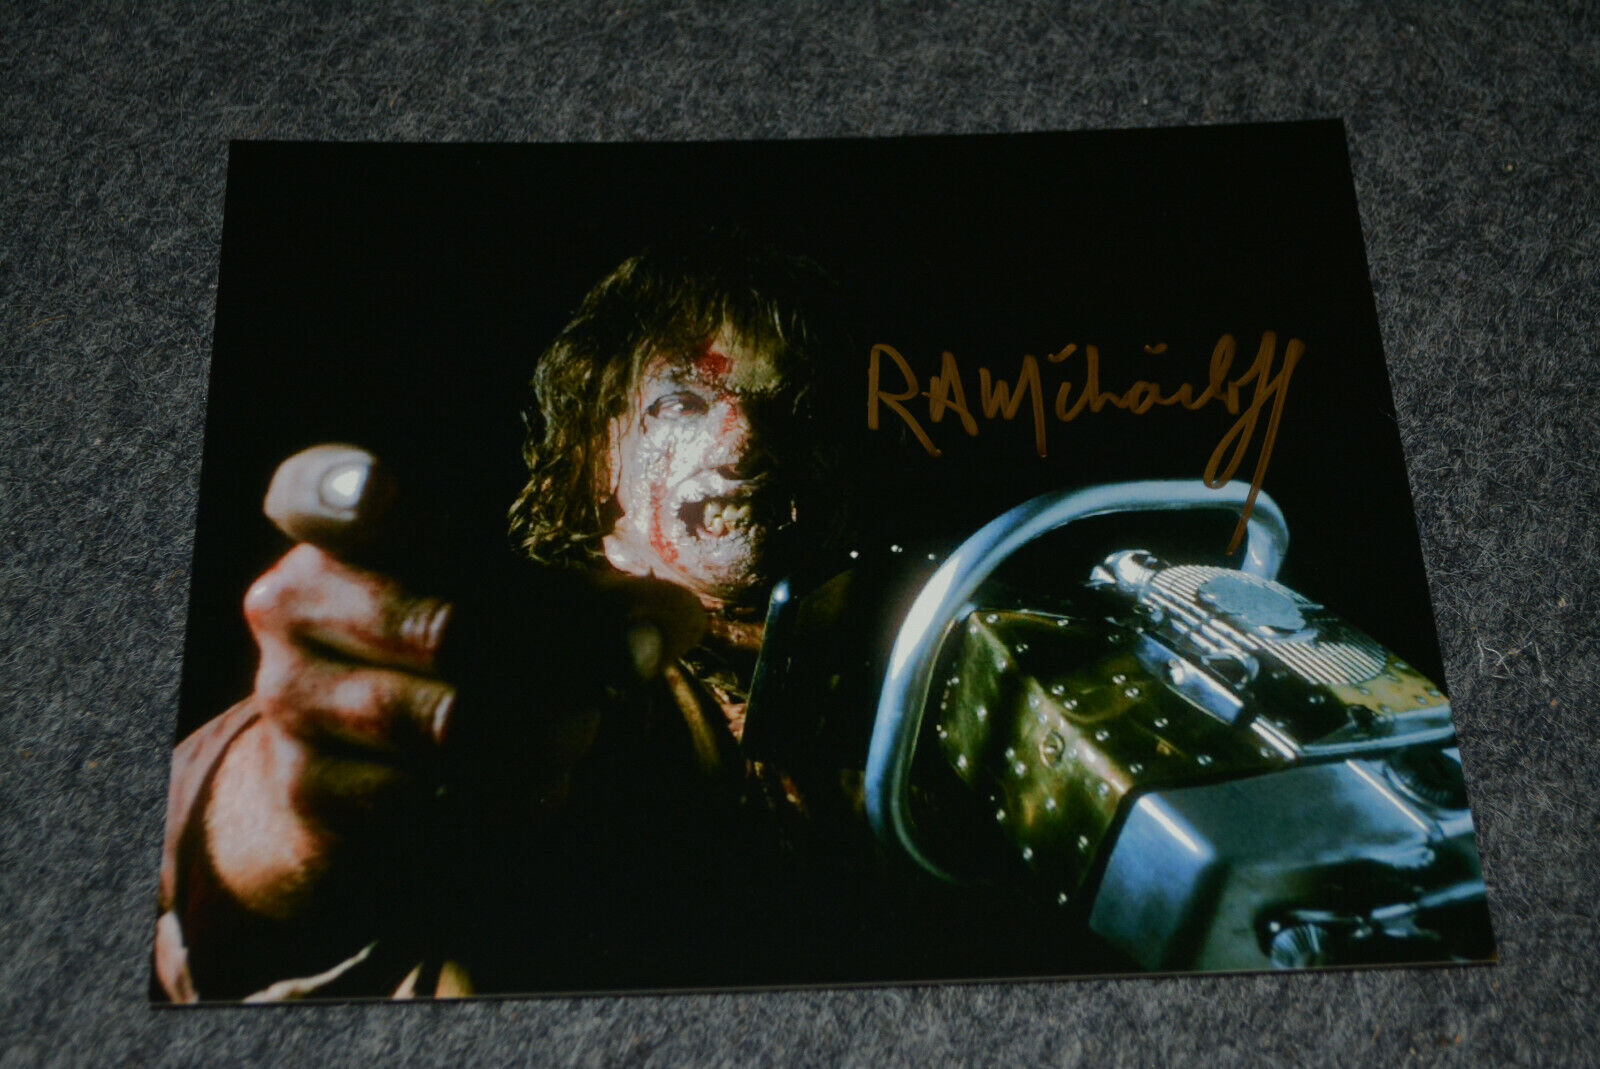 R.A. MIHAILOFF signed autograph In Person 8x10 LEATHERFACE TEXAS CHAINSAW